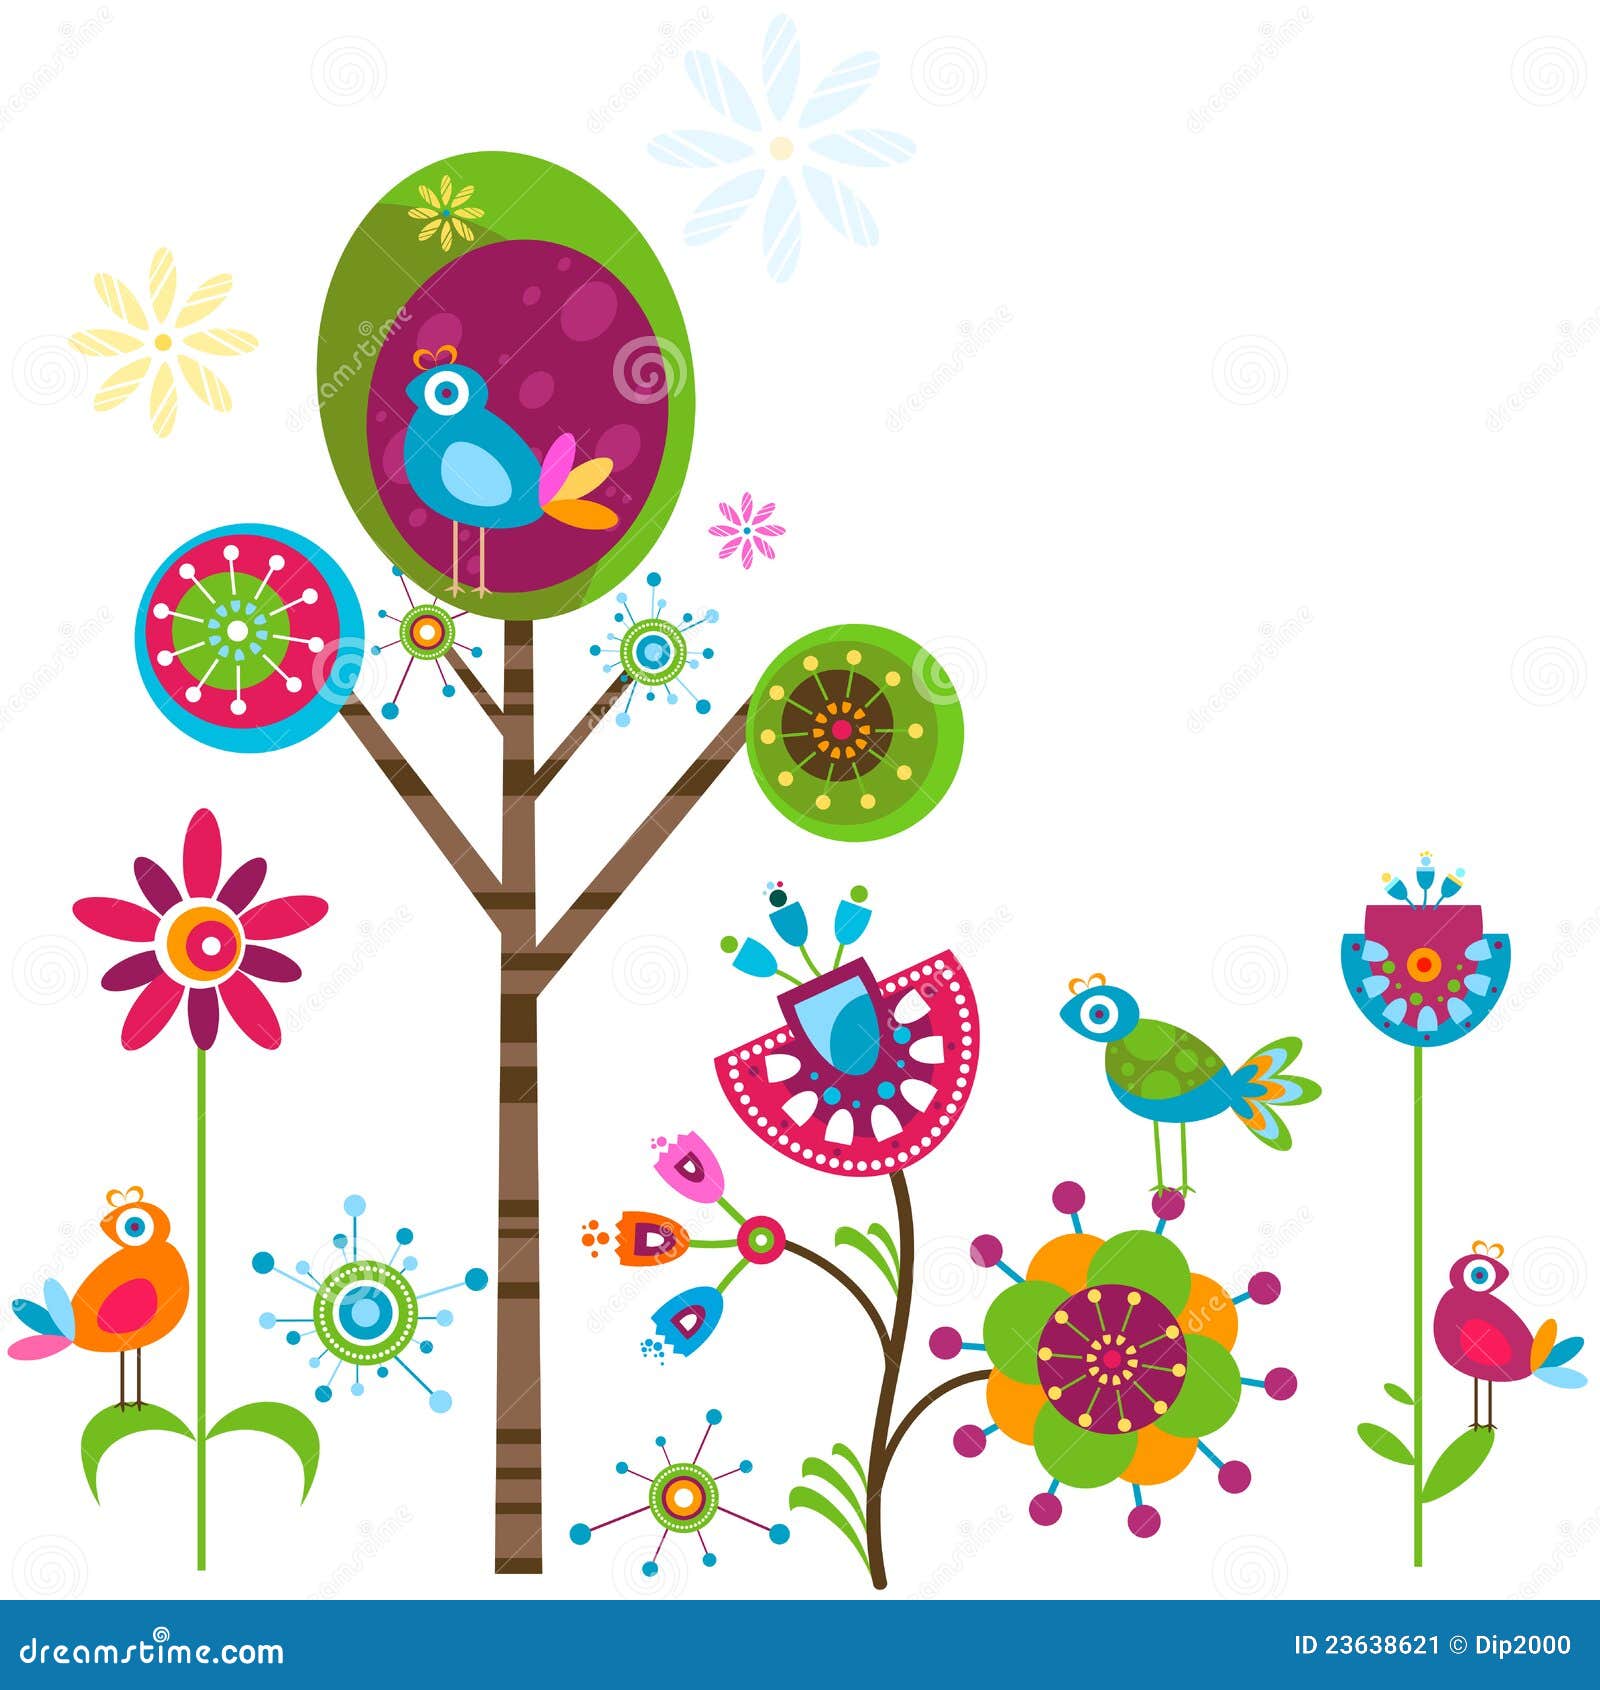 Whimsy flowers stock vector. Illustration of decoration - 23638621